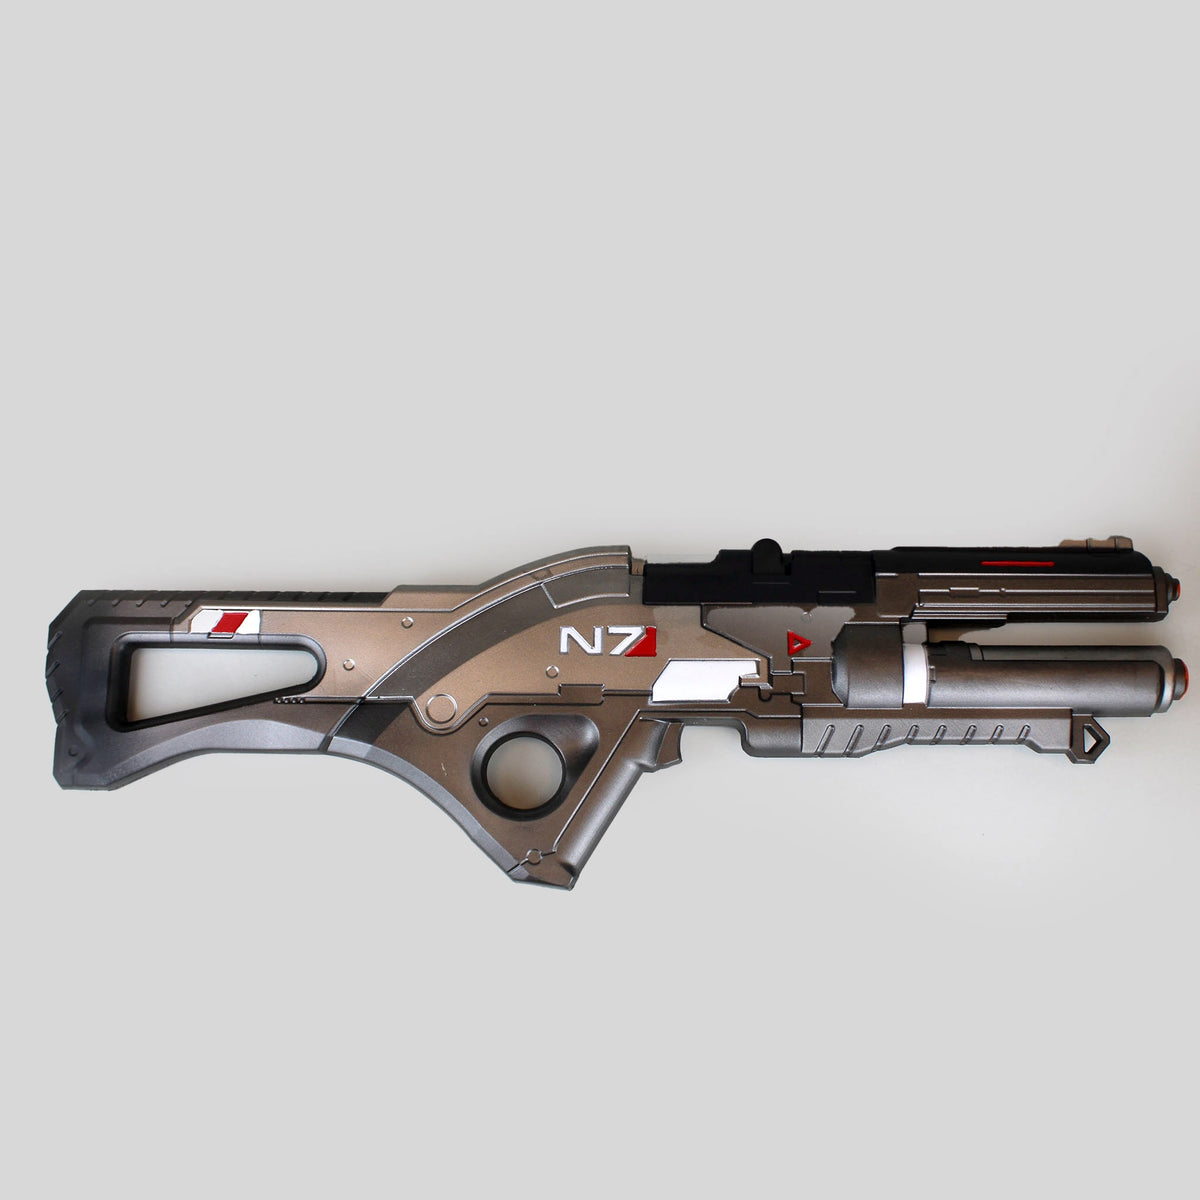 The N7 Rifle from Mass Effect 3 Replicated in Extreme Detail « Props & SFX  :: WonderHowTo